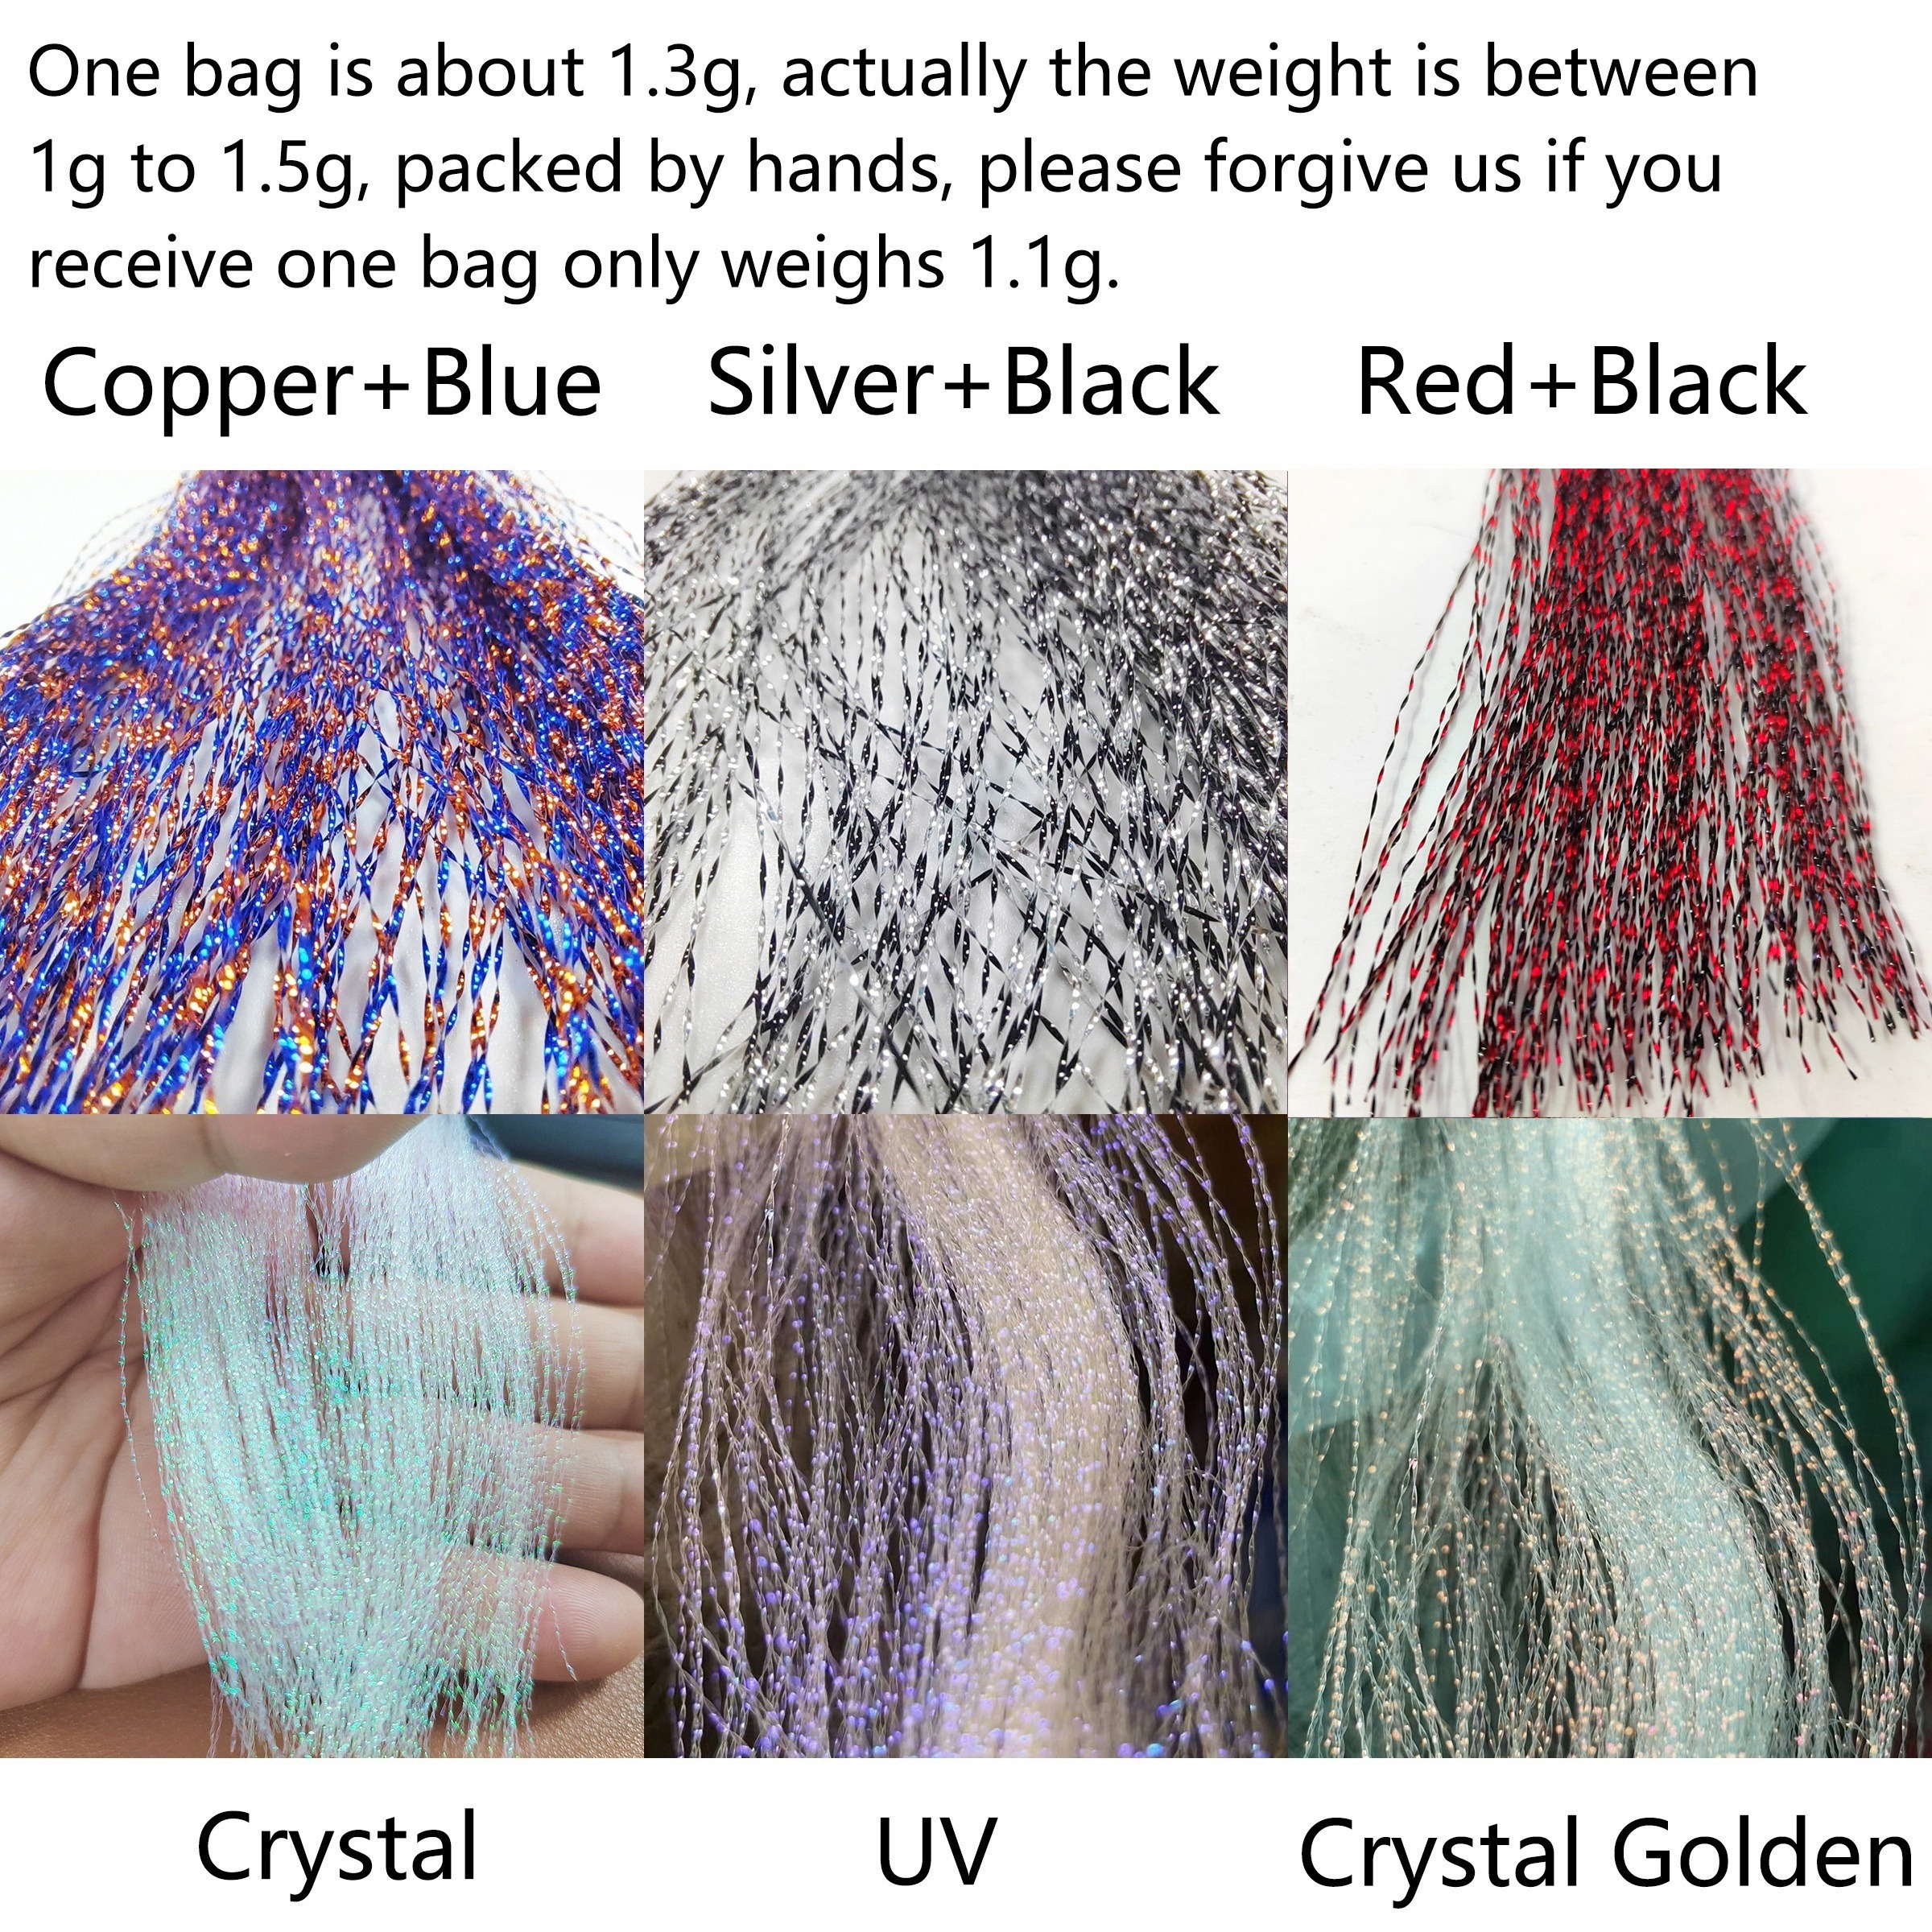 6 Bags Colorful * Tying Materials Supplies, UV * *